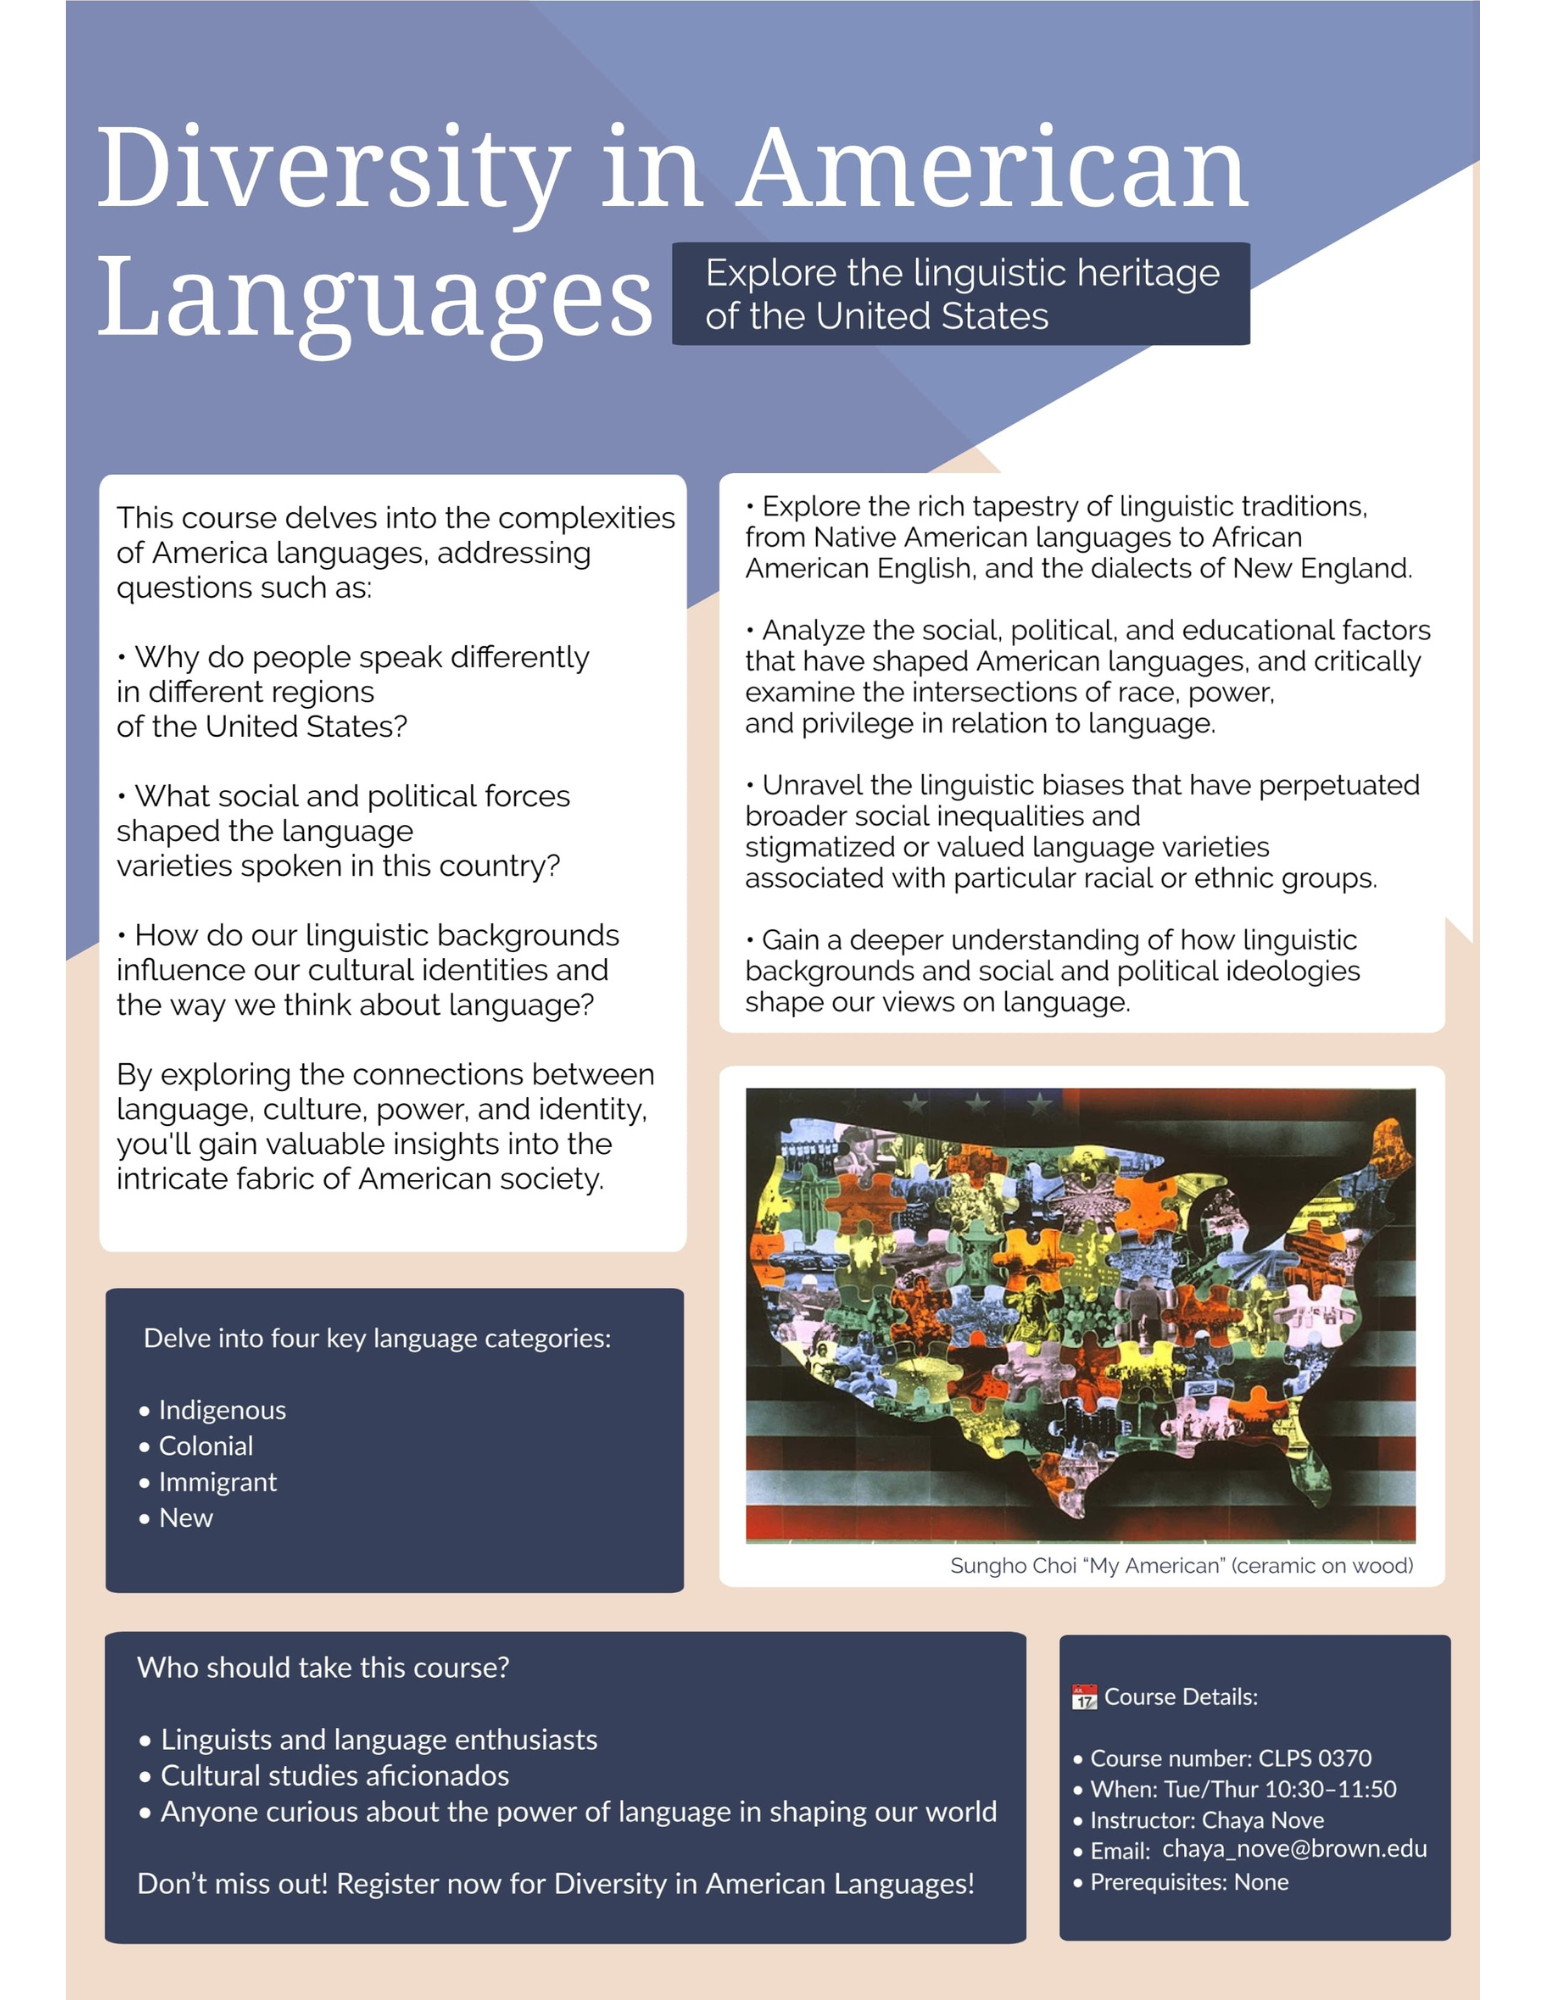 Diversity in American Languages flyer